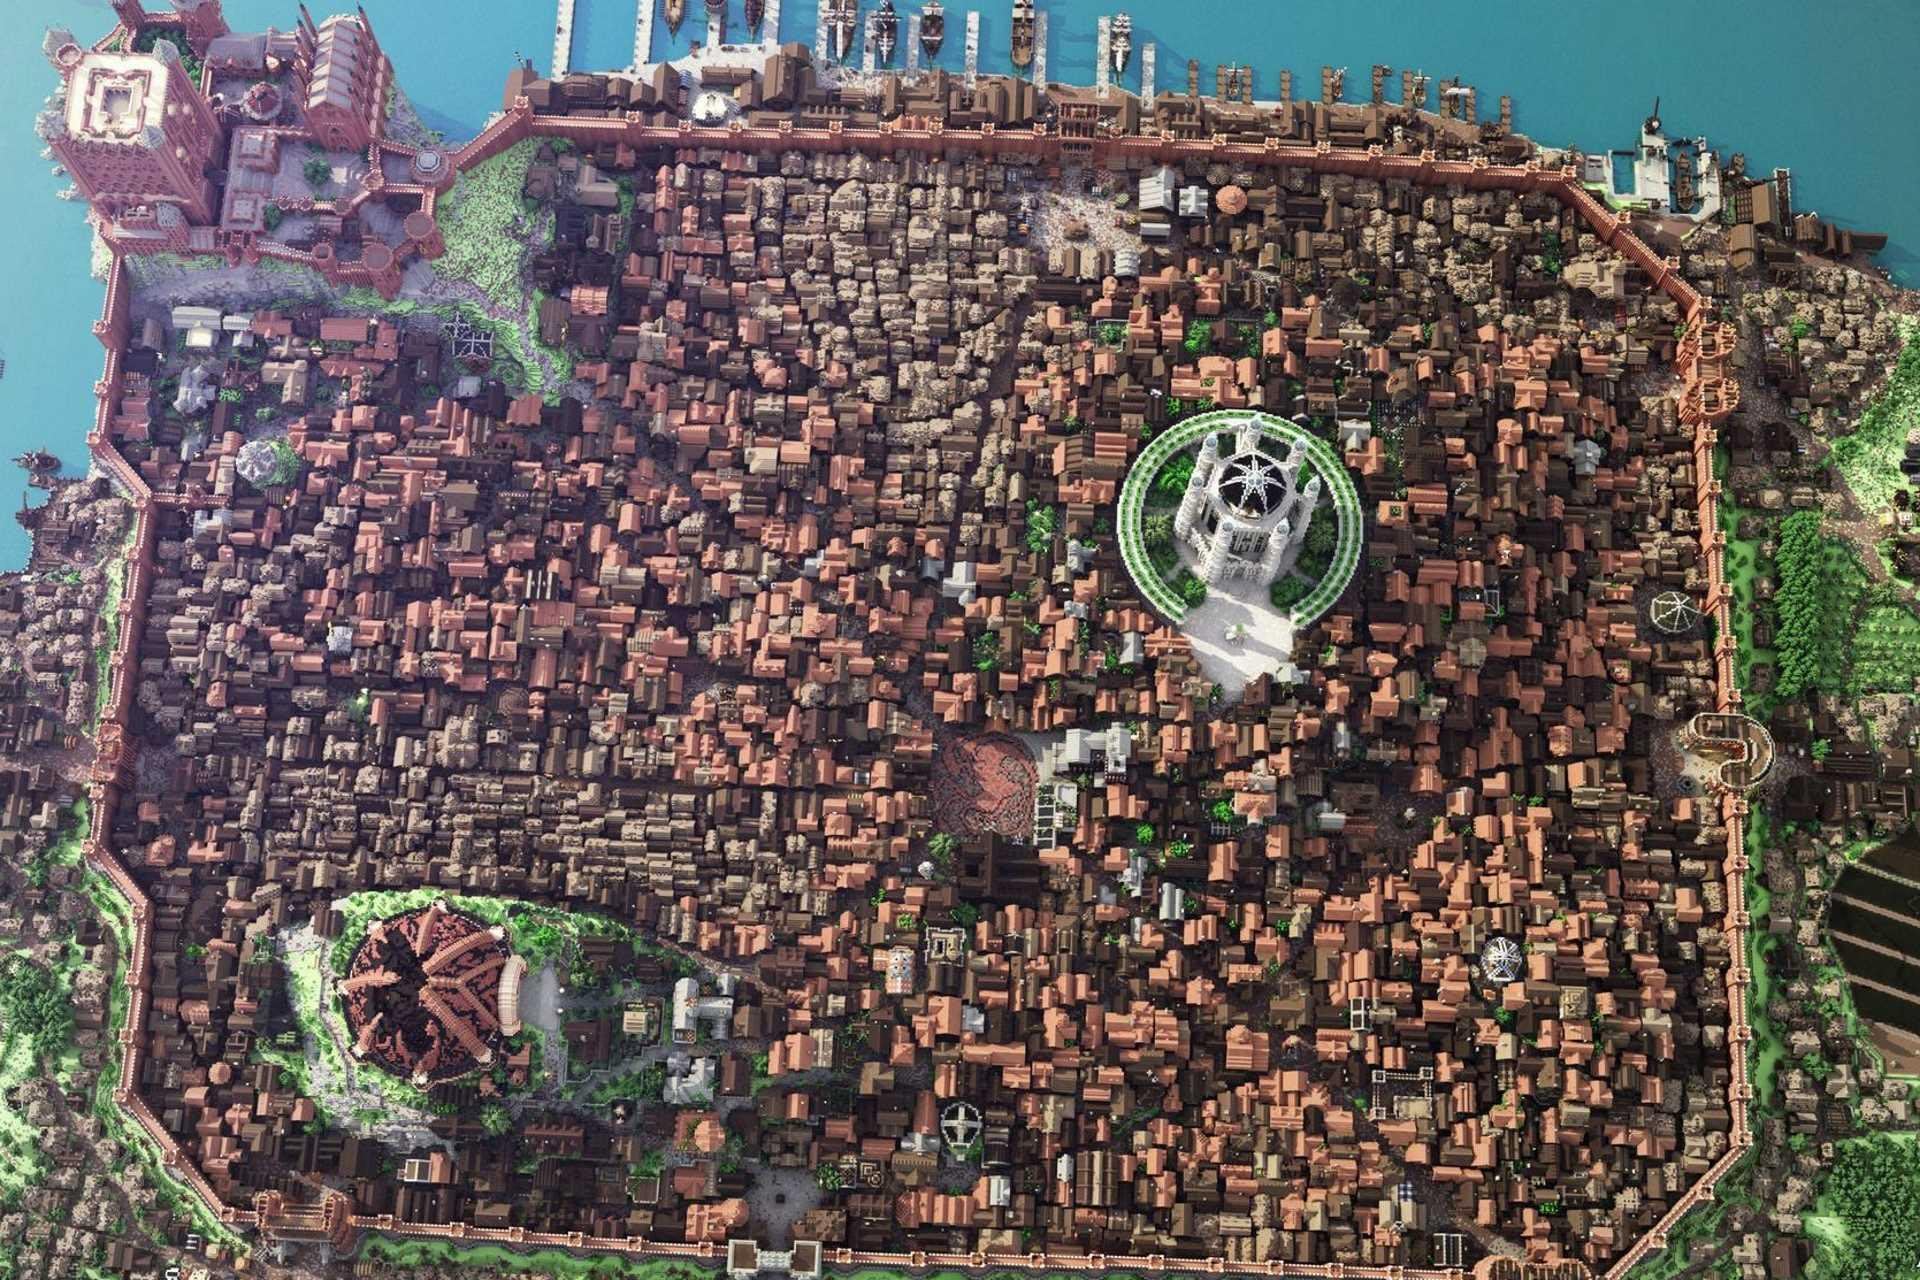 Just how big is that 1:1500 scale Minecraft recreation of Earth's